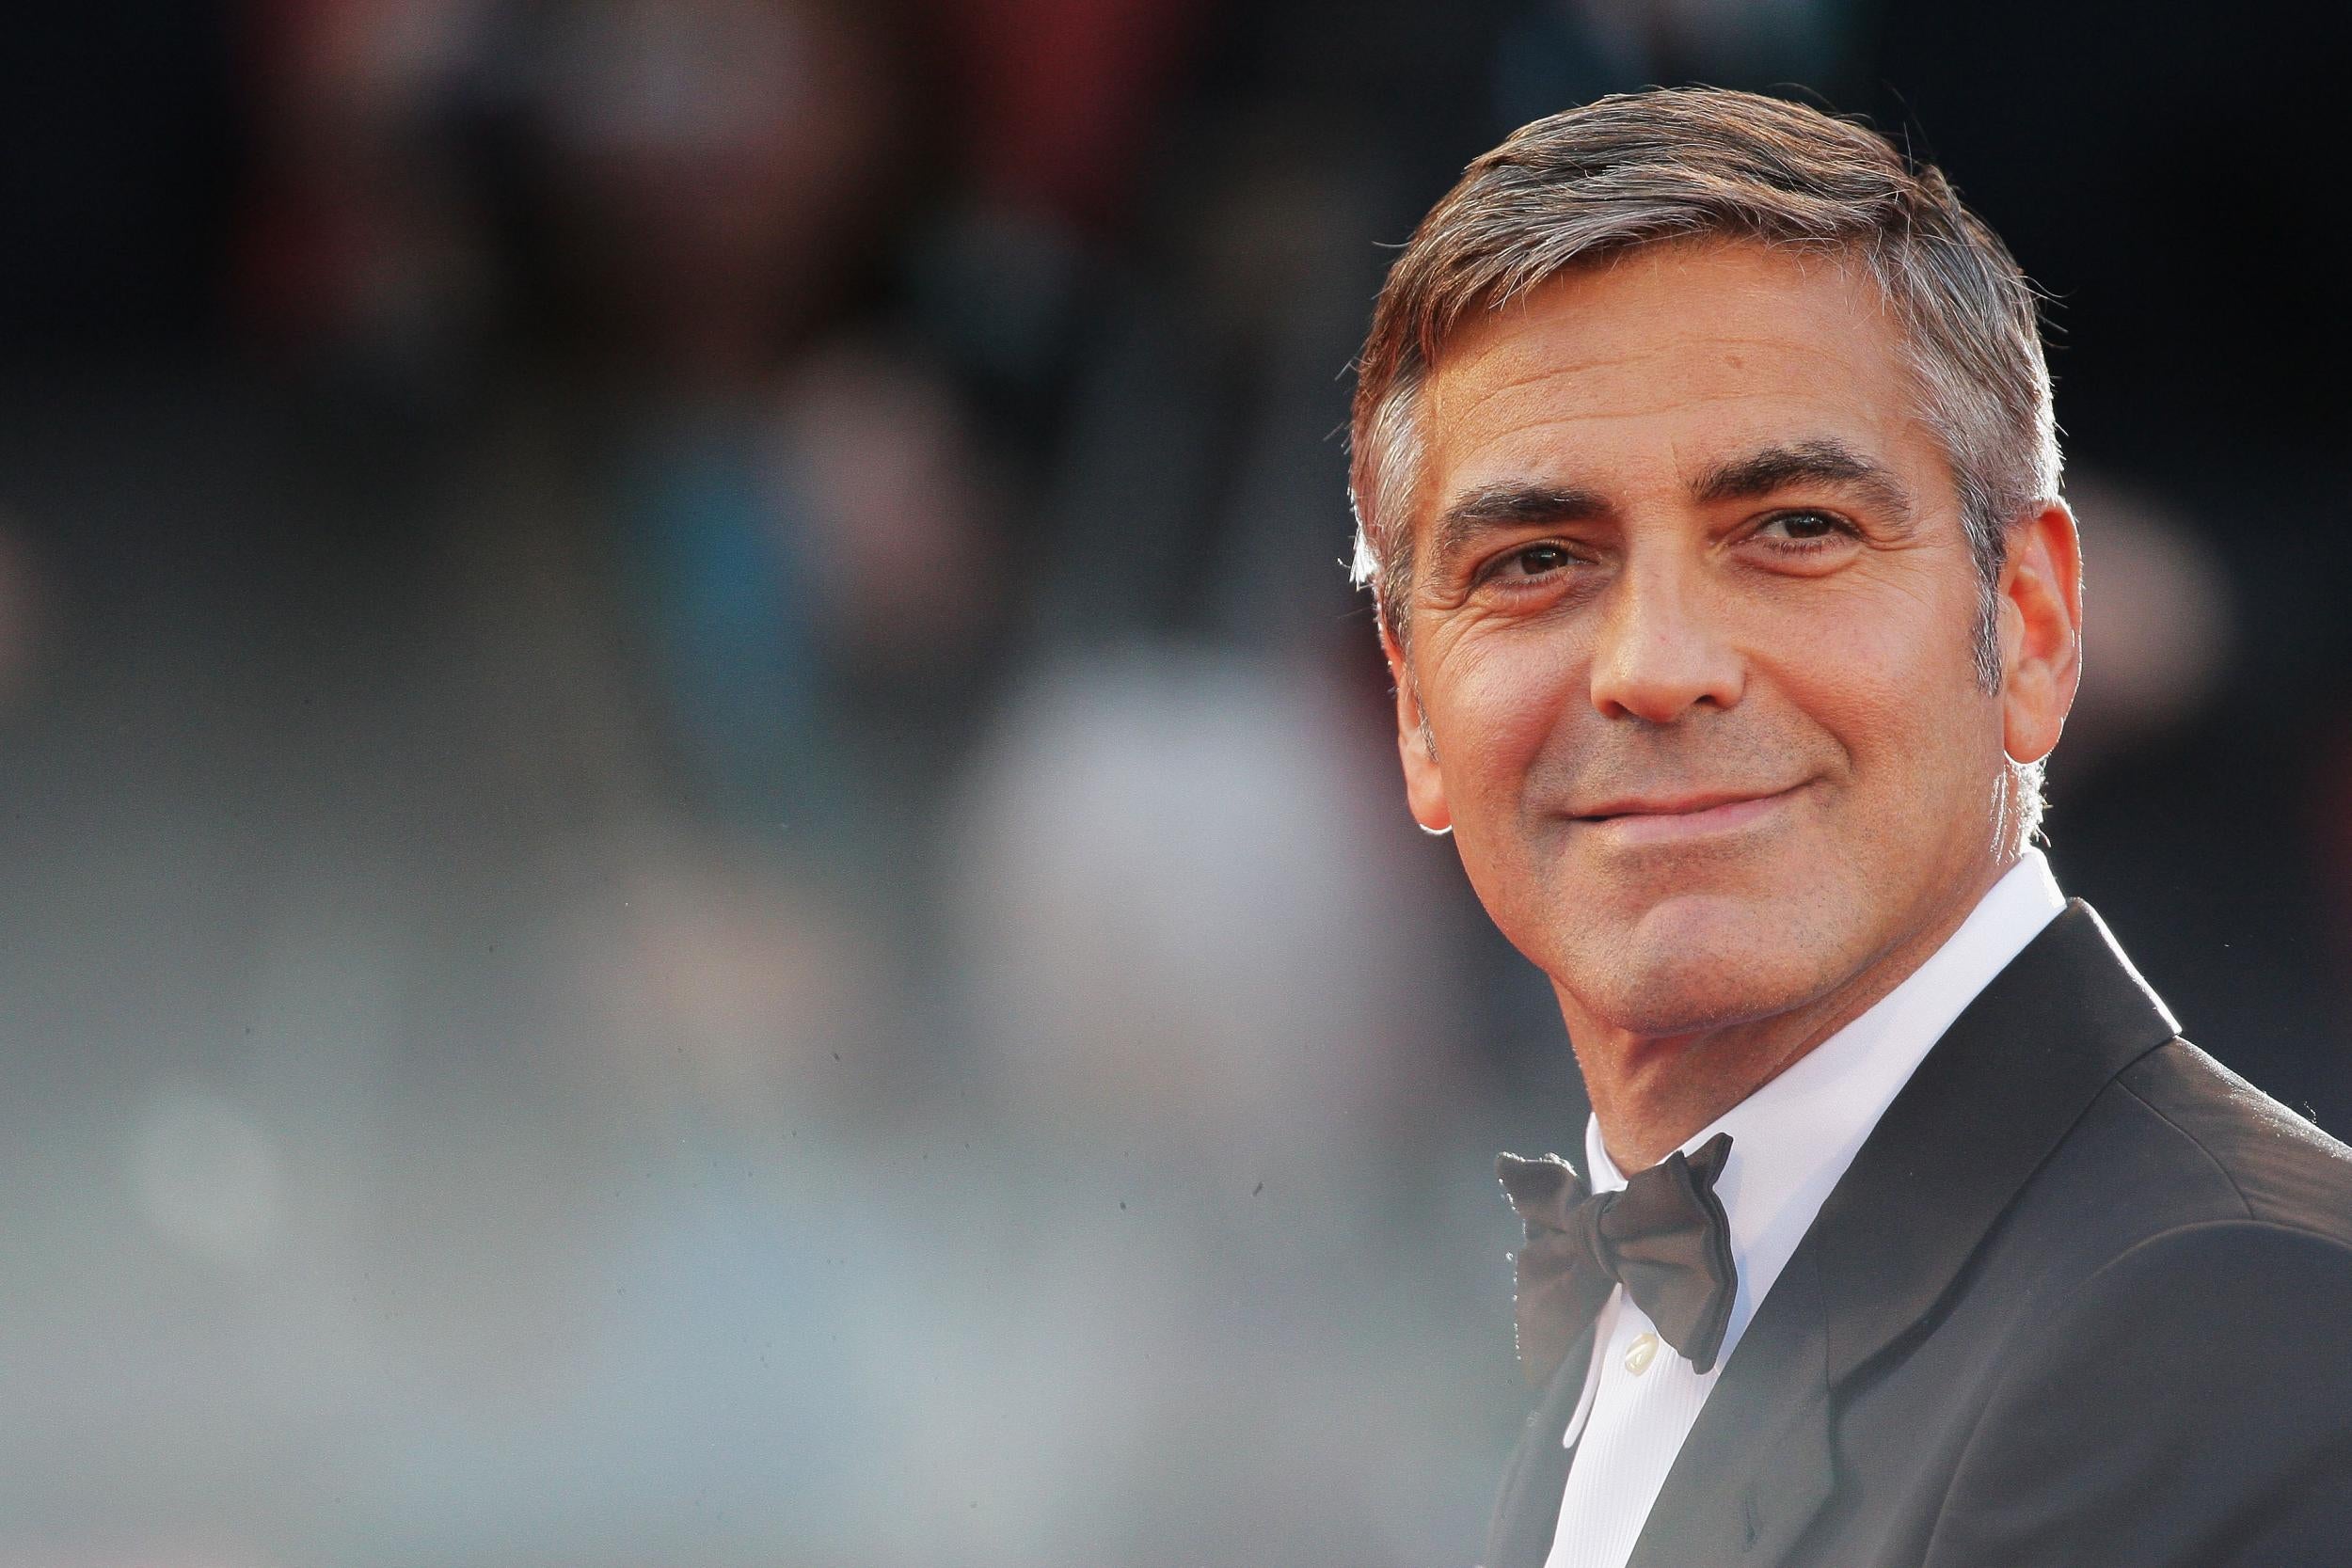 Actor George Clooney attends "The Men Who Stare At Goats" premiere at the Sala Grande during the 66th Venice Film Festival on September 8, 2009 in Venice, Italy.